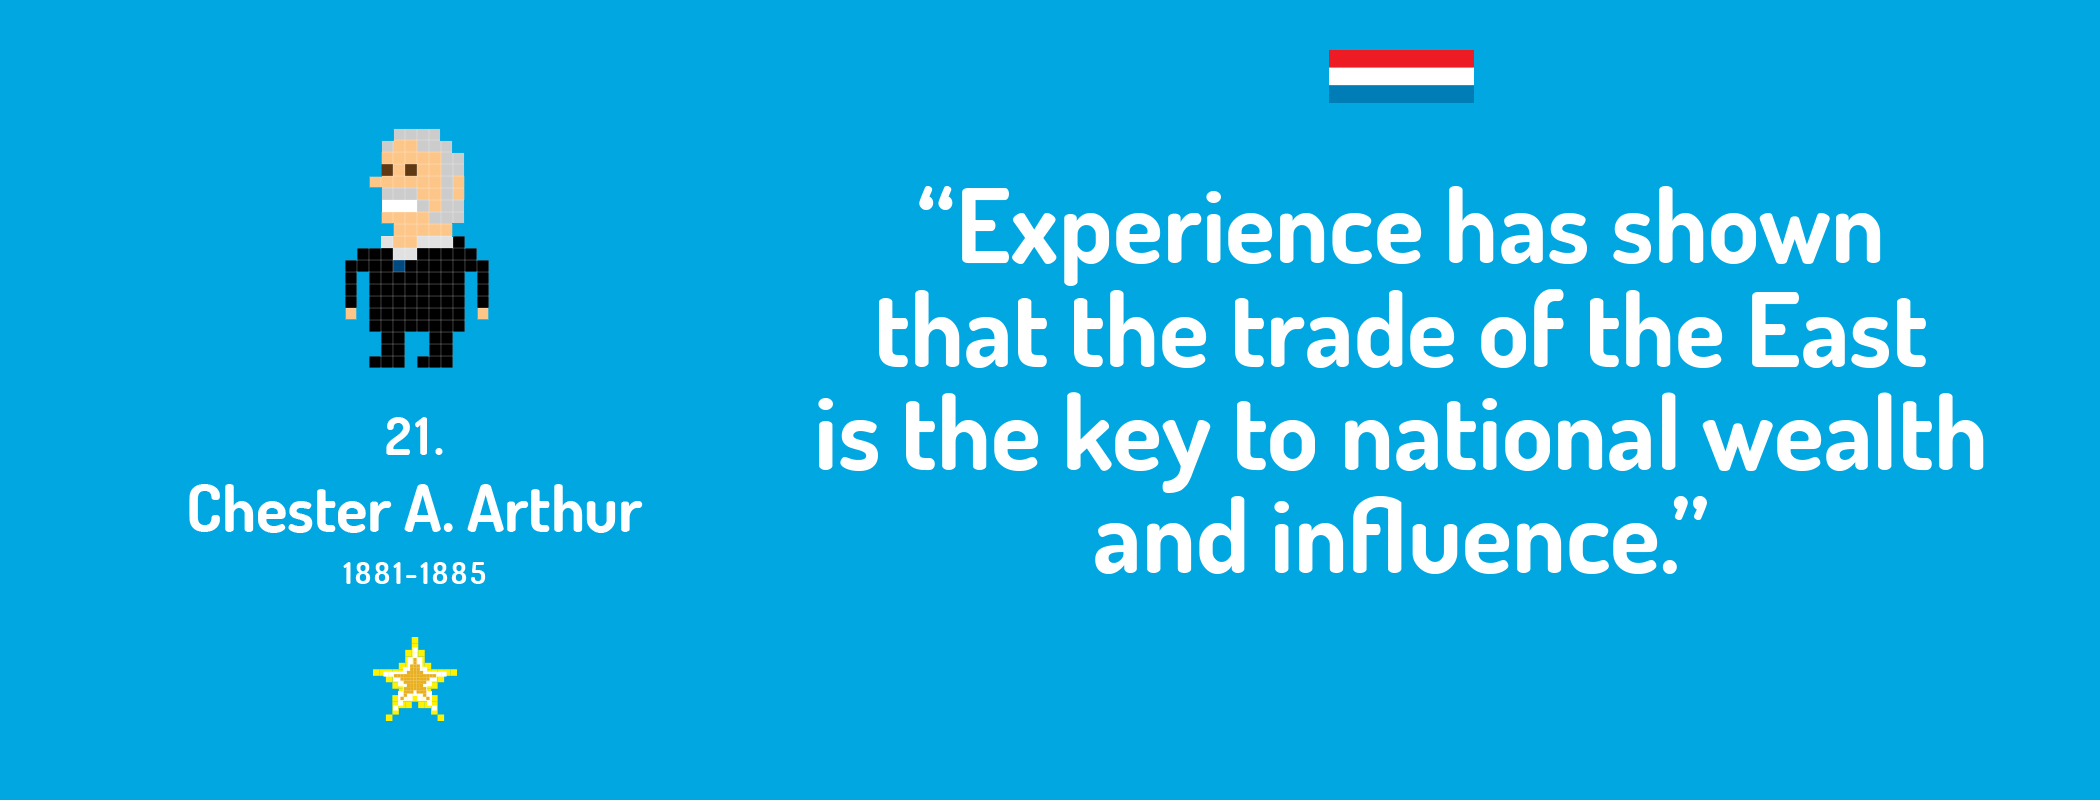 Experience has shown that the trade of the East is the key to national wealth and influence.